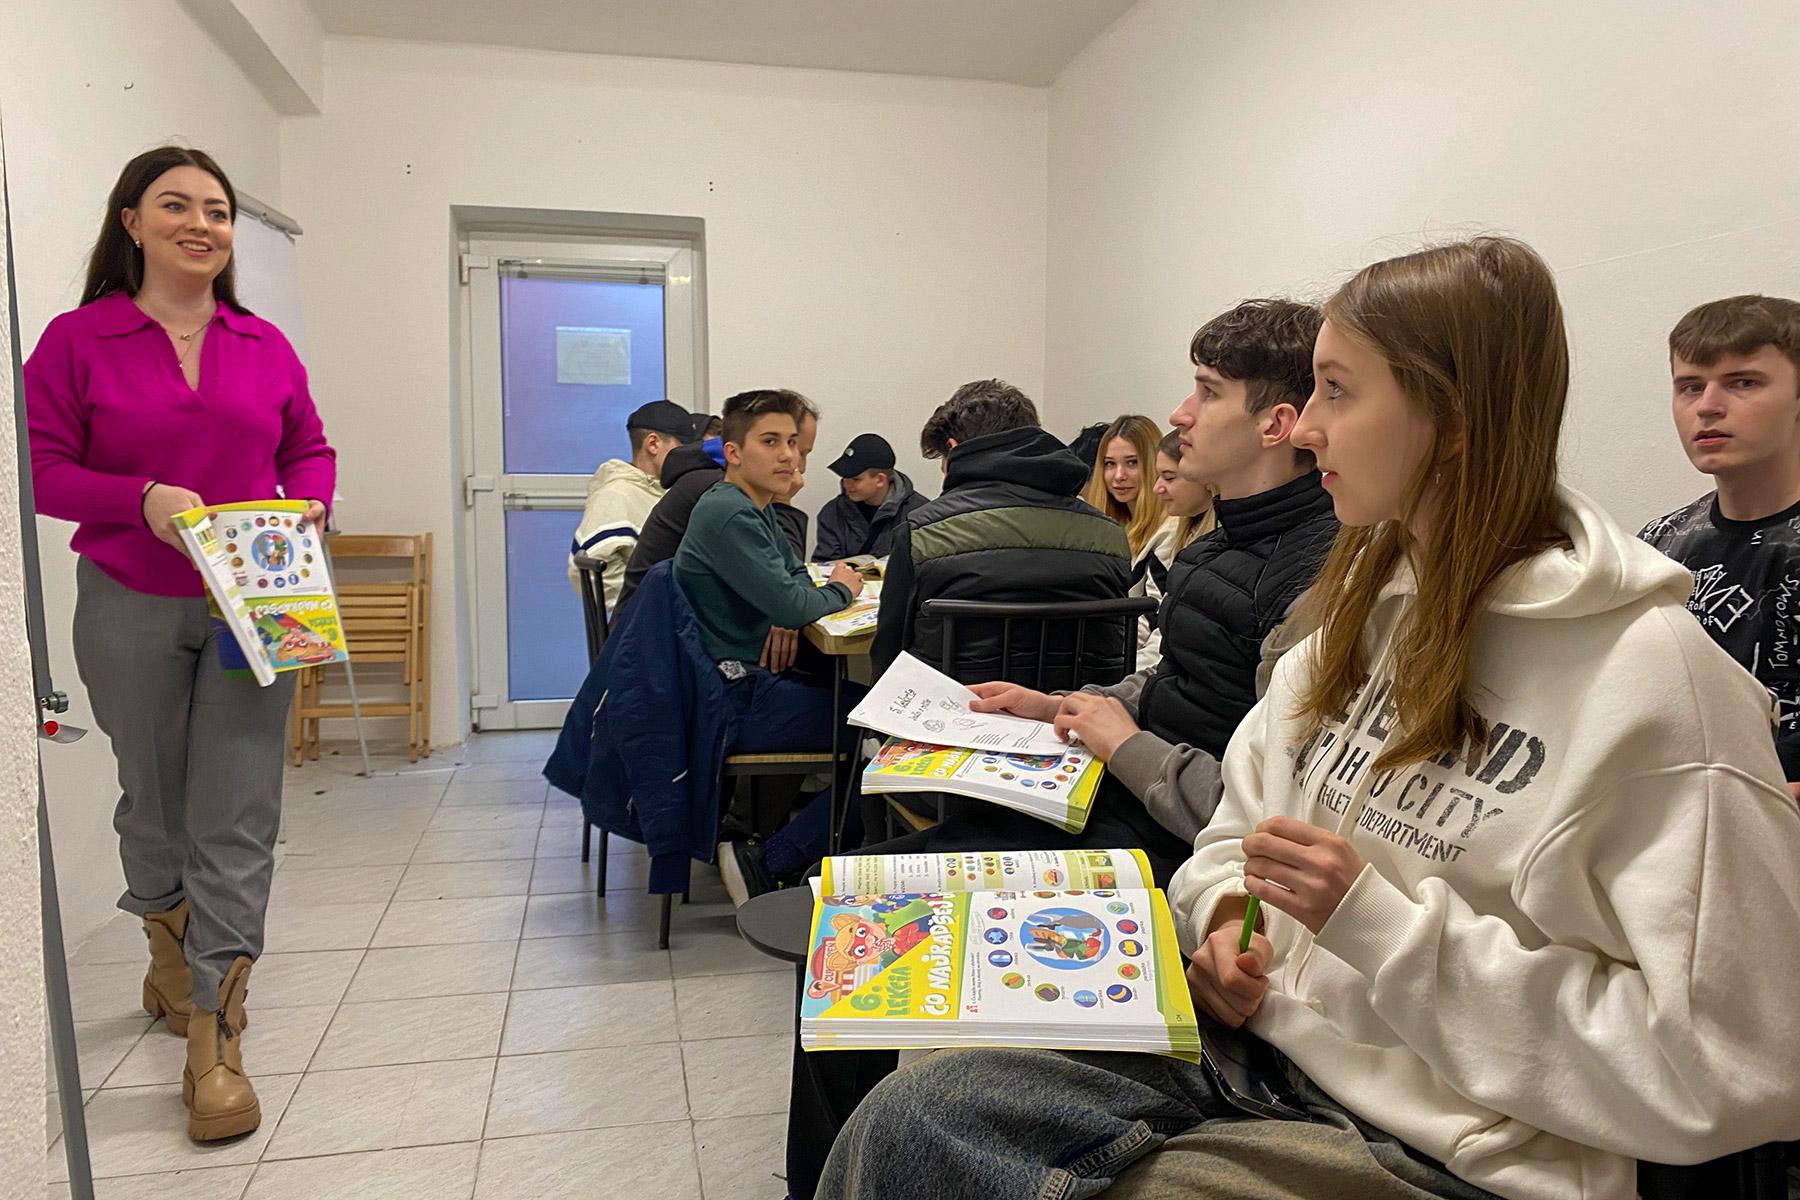 Students attend language classes in Nitra, Slovakia. Photo: LWF/ R. Meissner